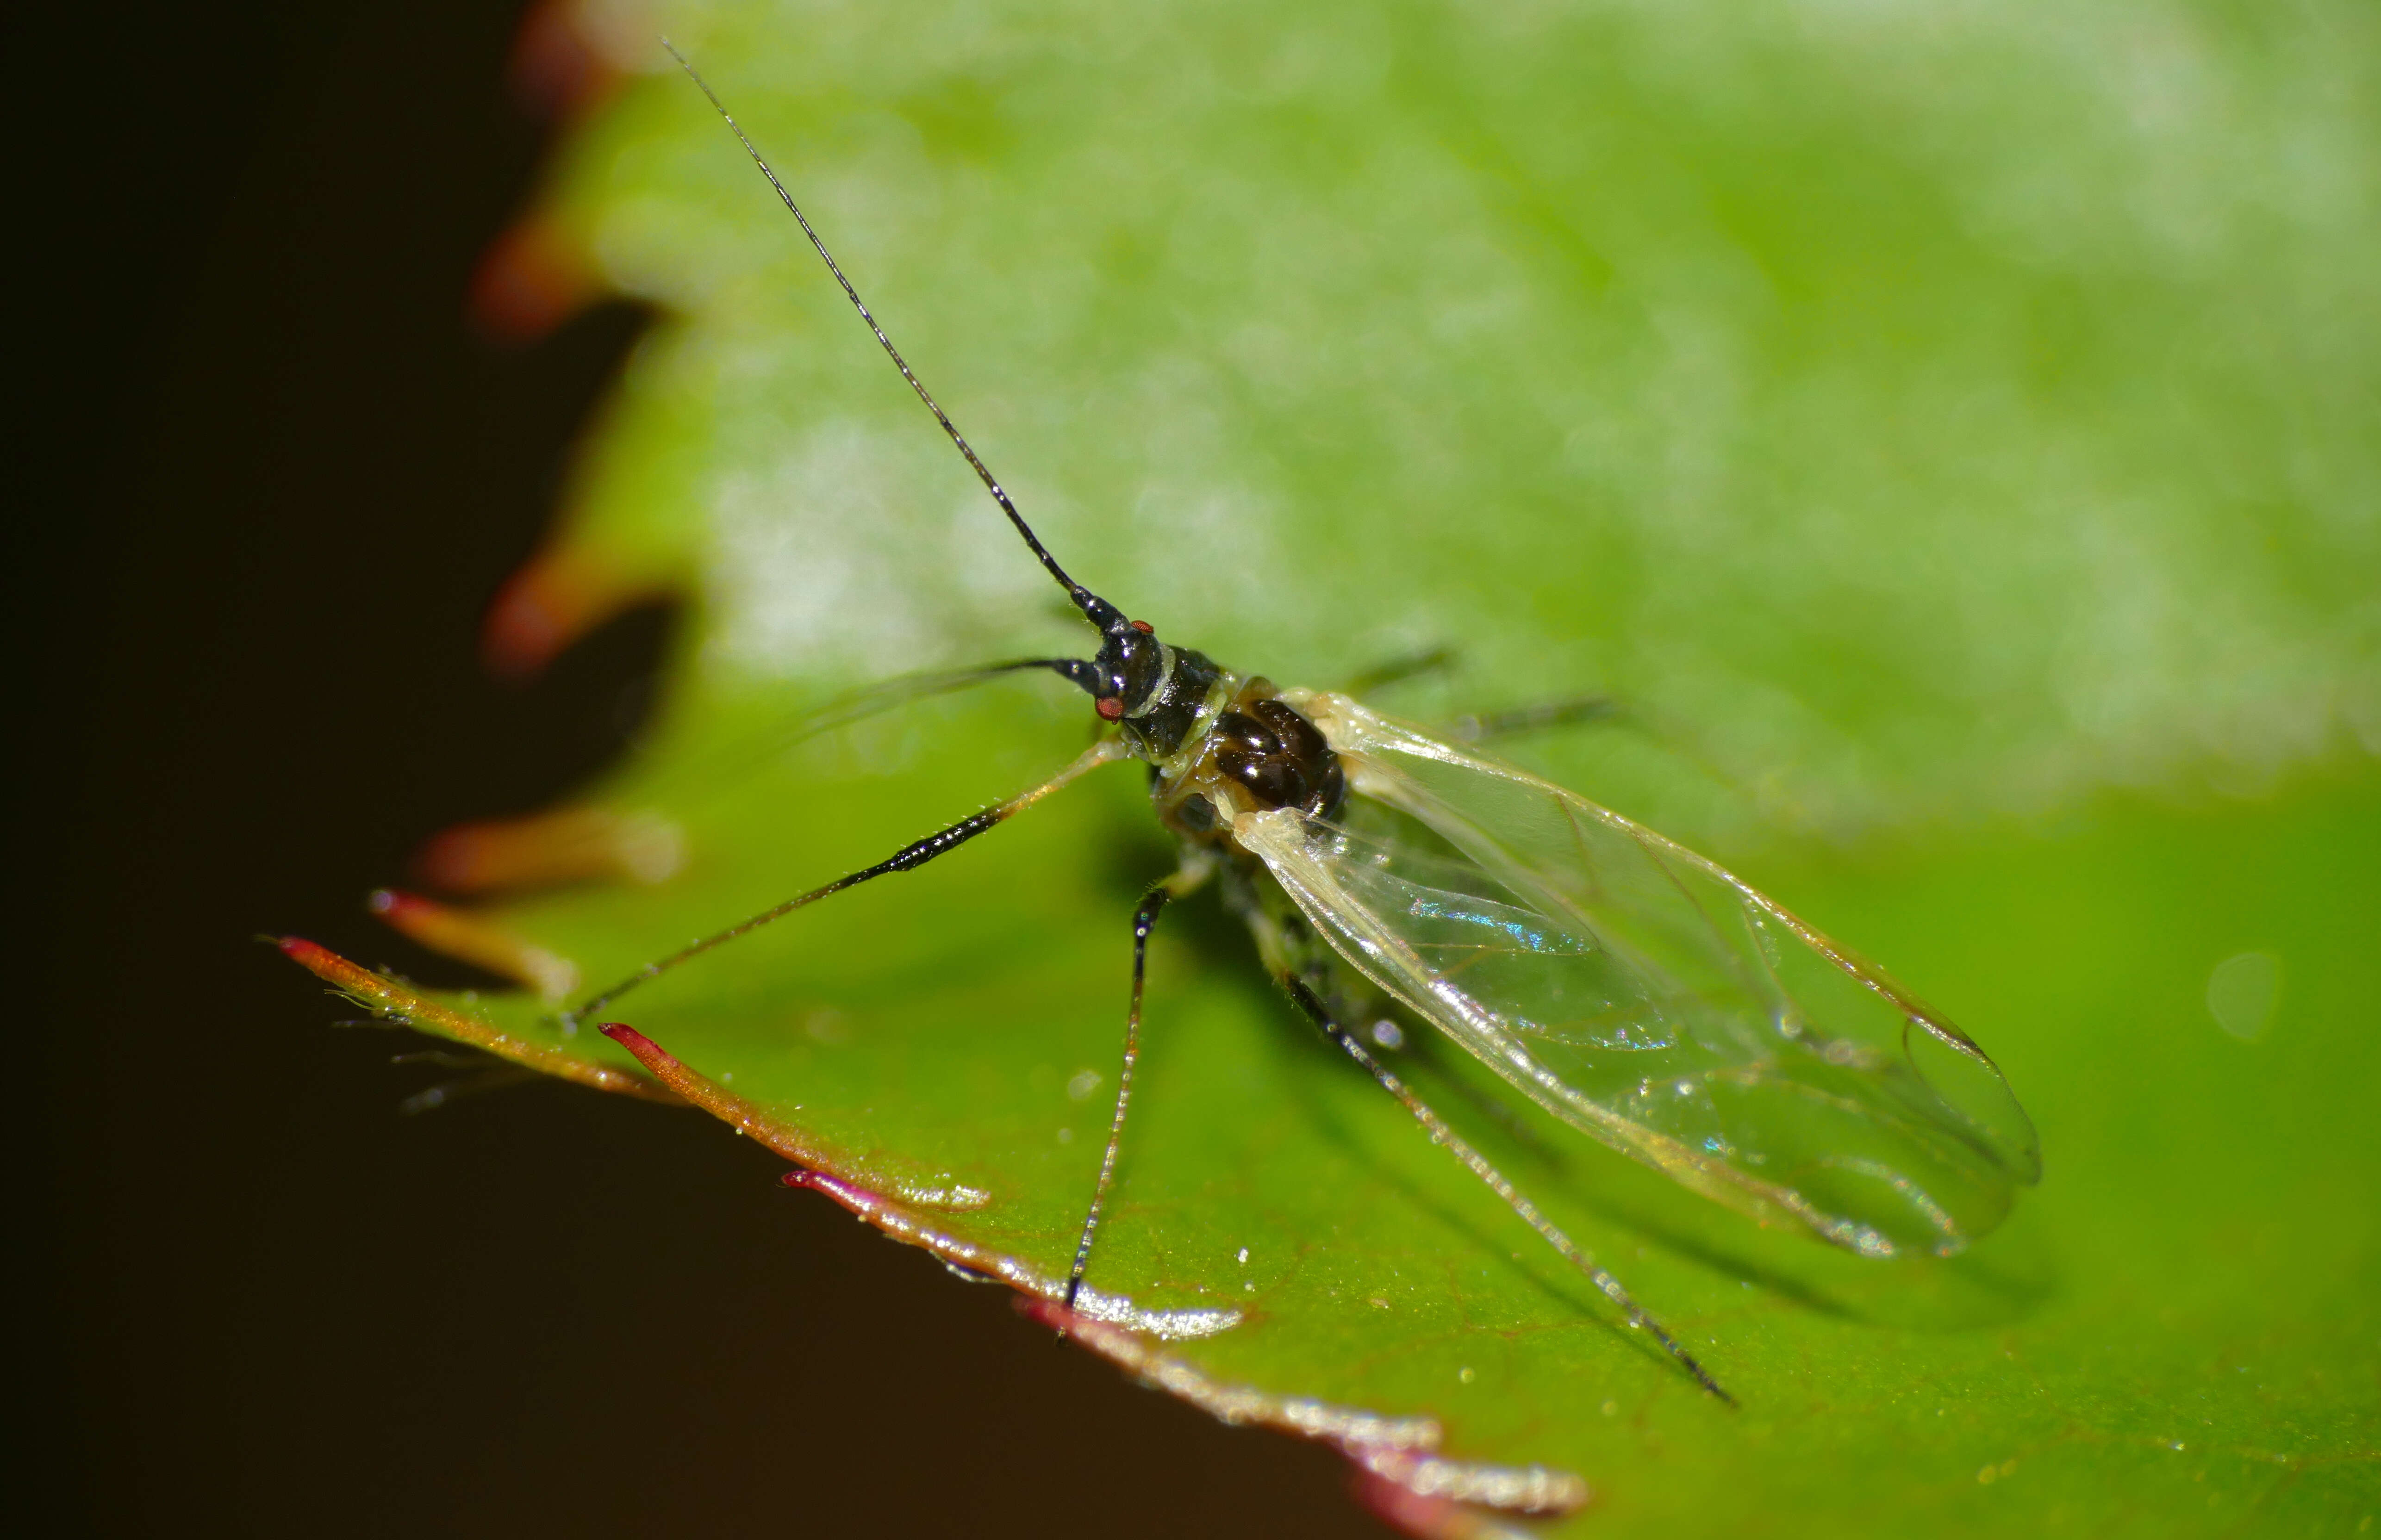 Image of Rose Aphid